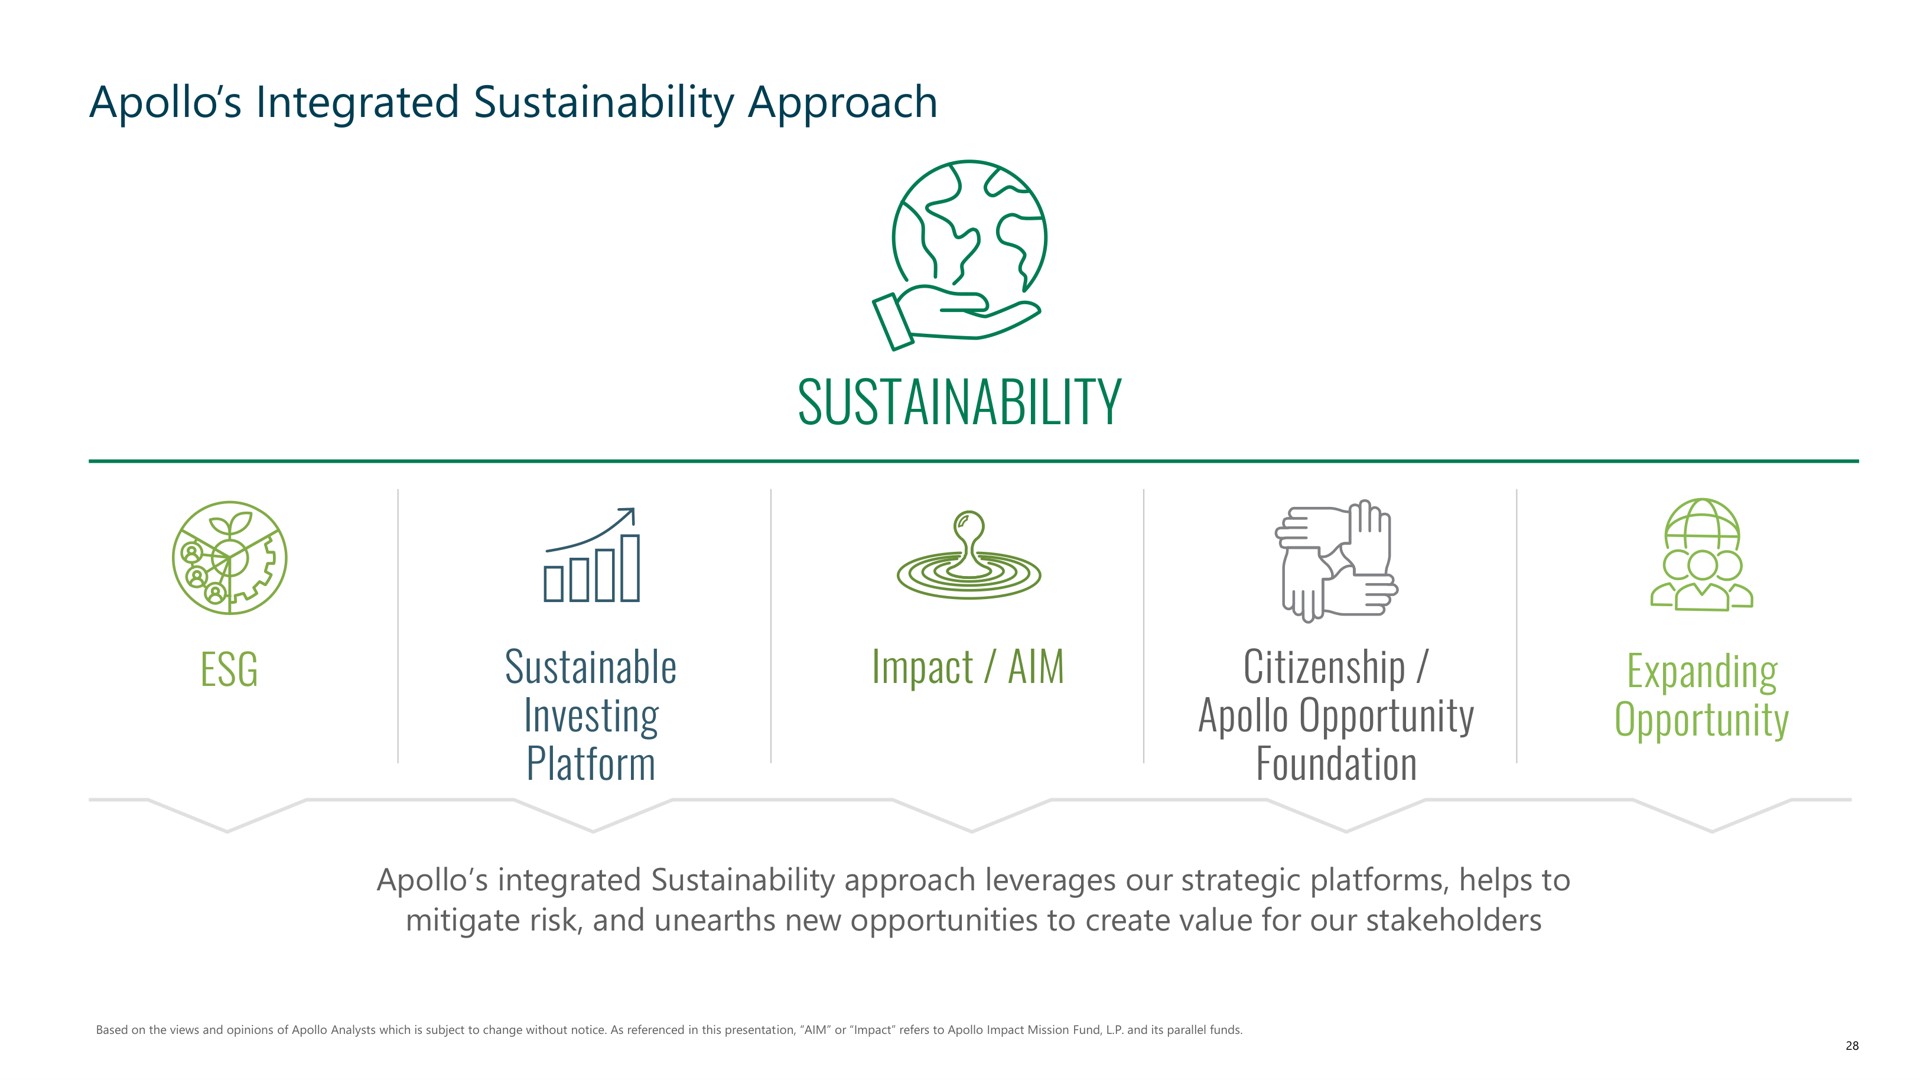 integrated approach sustainable investing platform impact aim citizenship opportunity foundation expanding opportunity | Apollo Global Management